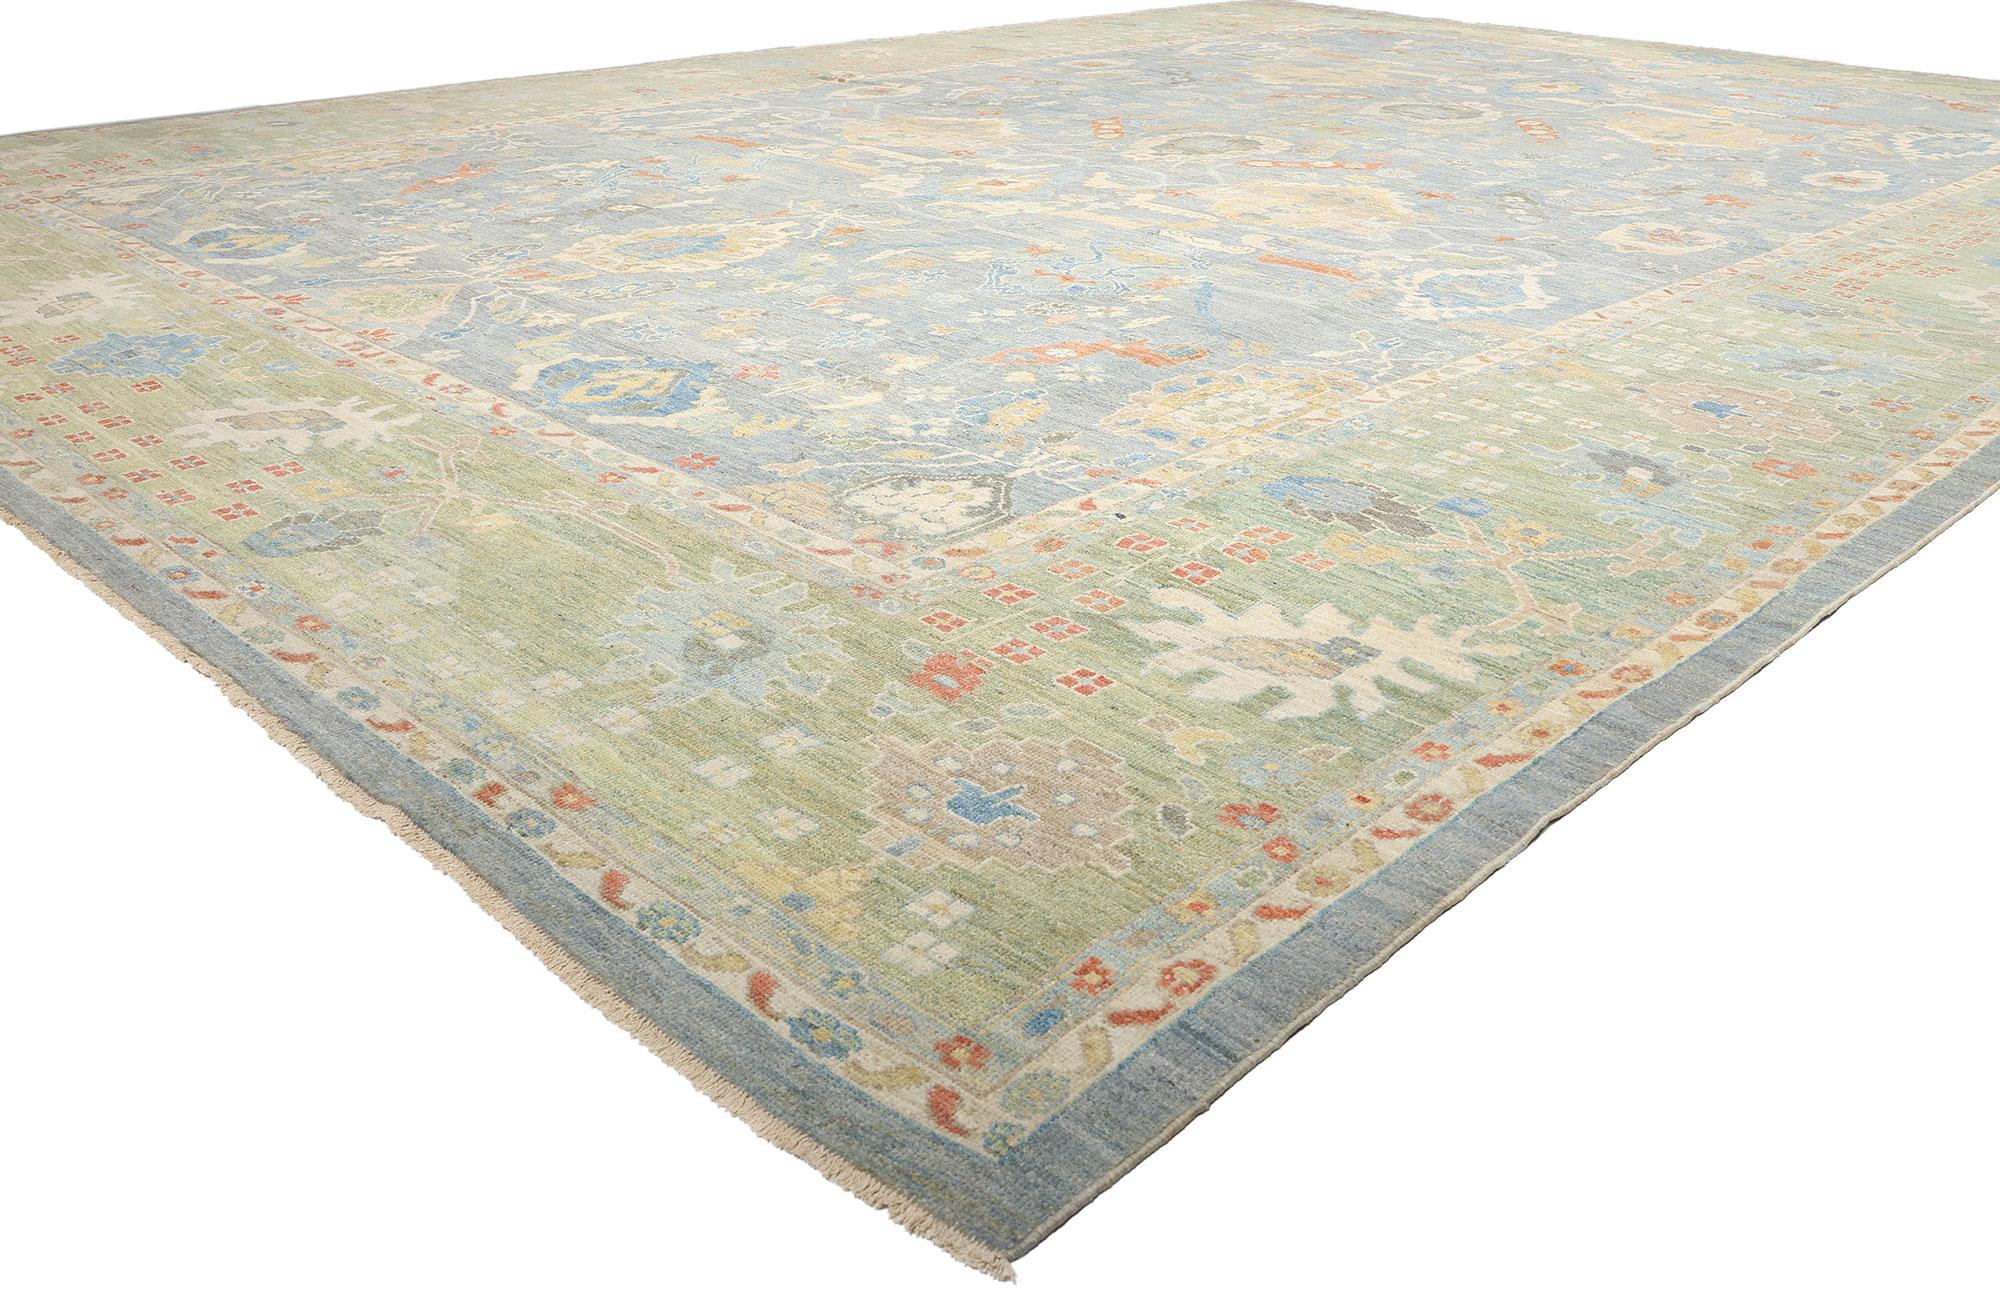 61281 Modern Light Blue Persian Sultanabad Rug, 16'03 x 22'07. Originating from Iran's Sultanabad region, Persian Sultanabad rugs are esteemed for their exceptional craftsmanship, durable materials, and detailed designs. Meticulously handwoven,